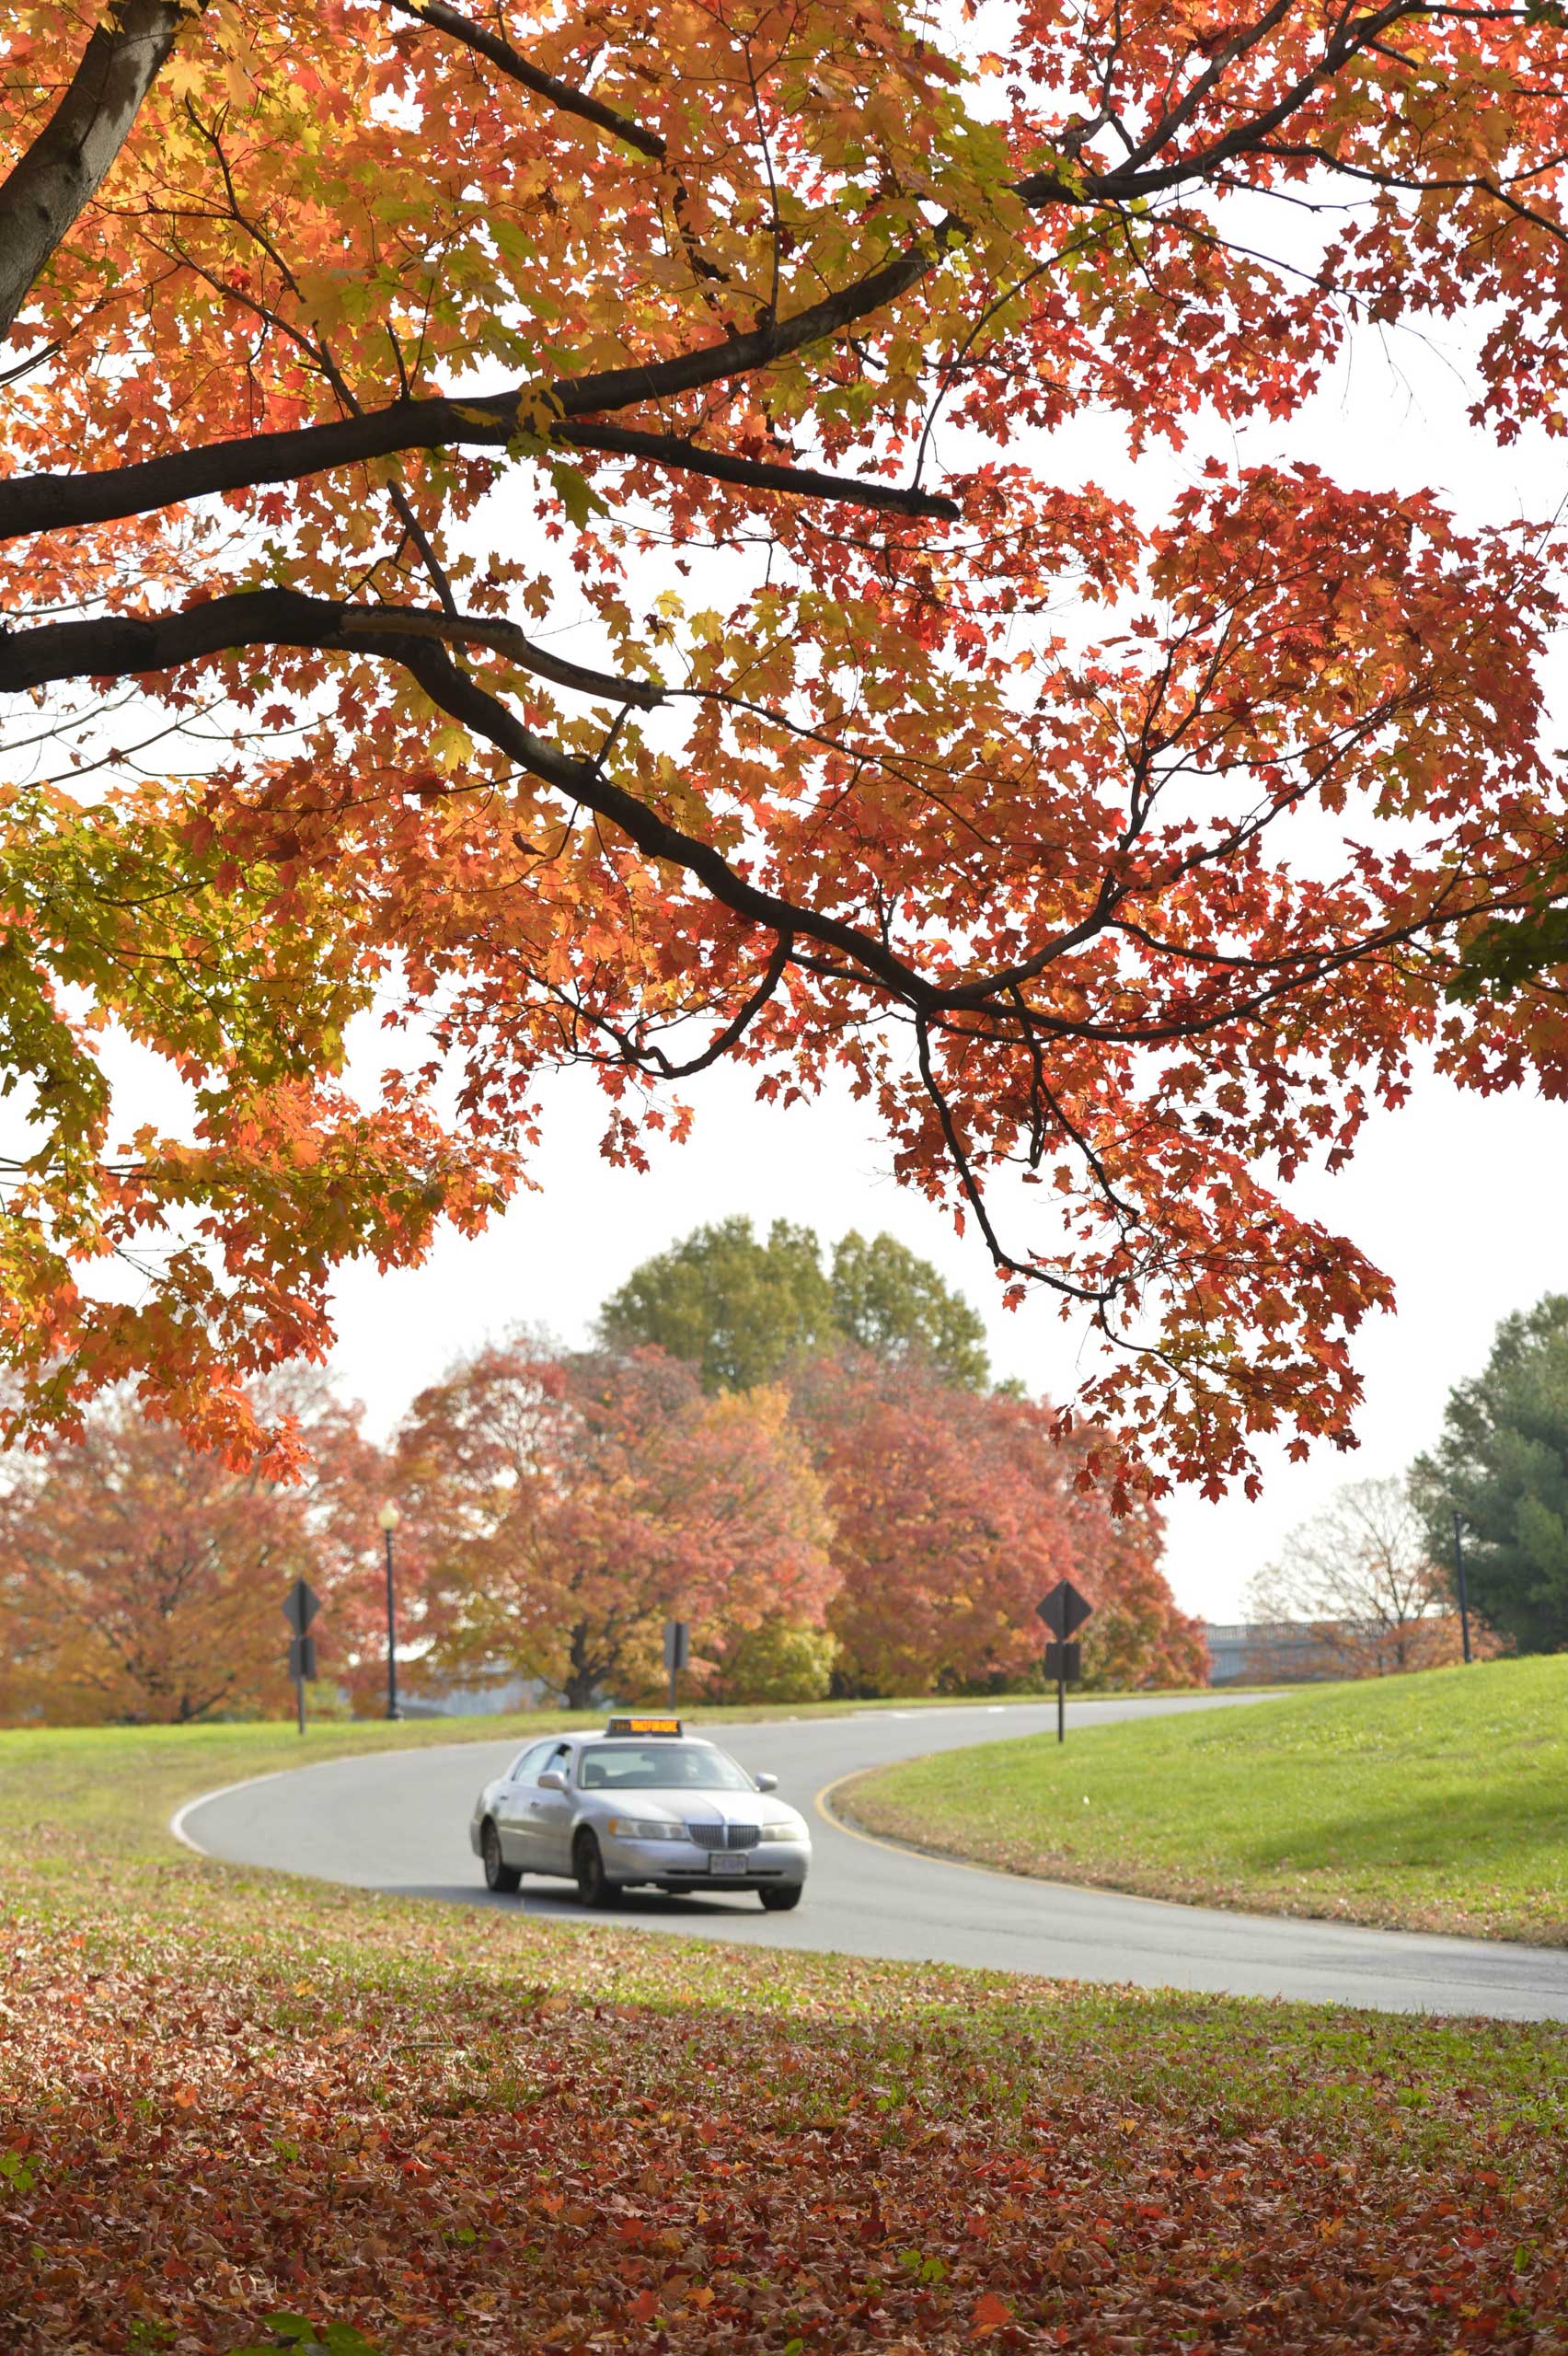 A car runs past fall foliage in Washington D.C., capital of the United States, on Oct. 28, 2014.